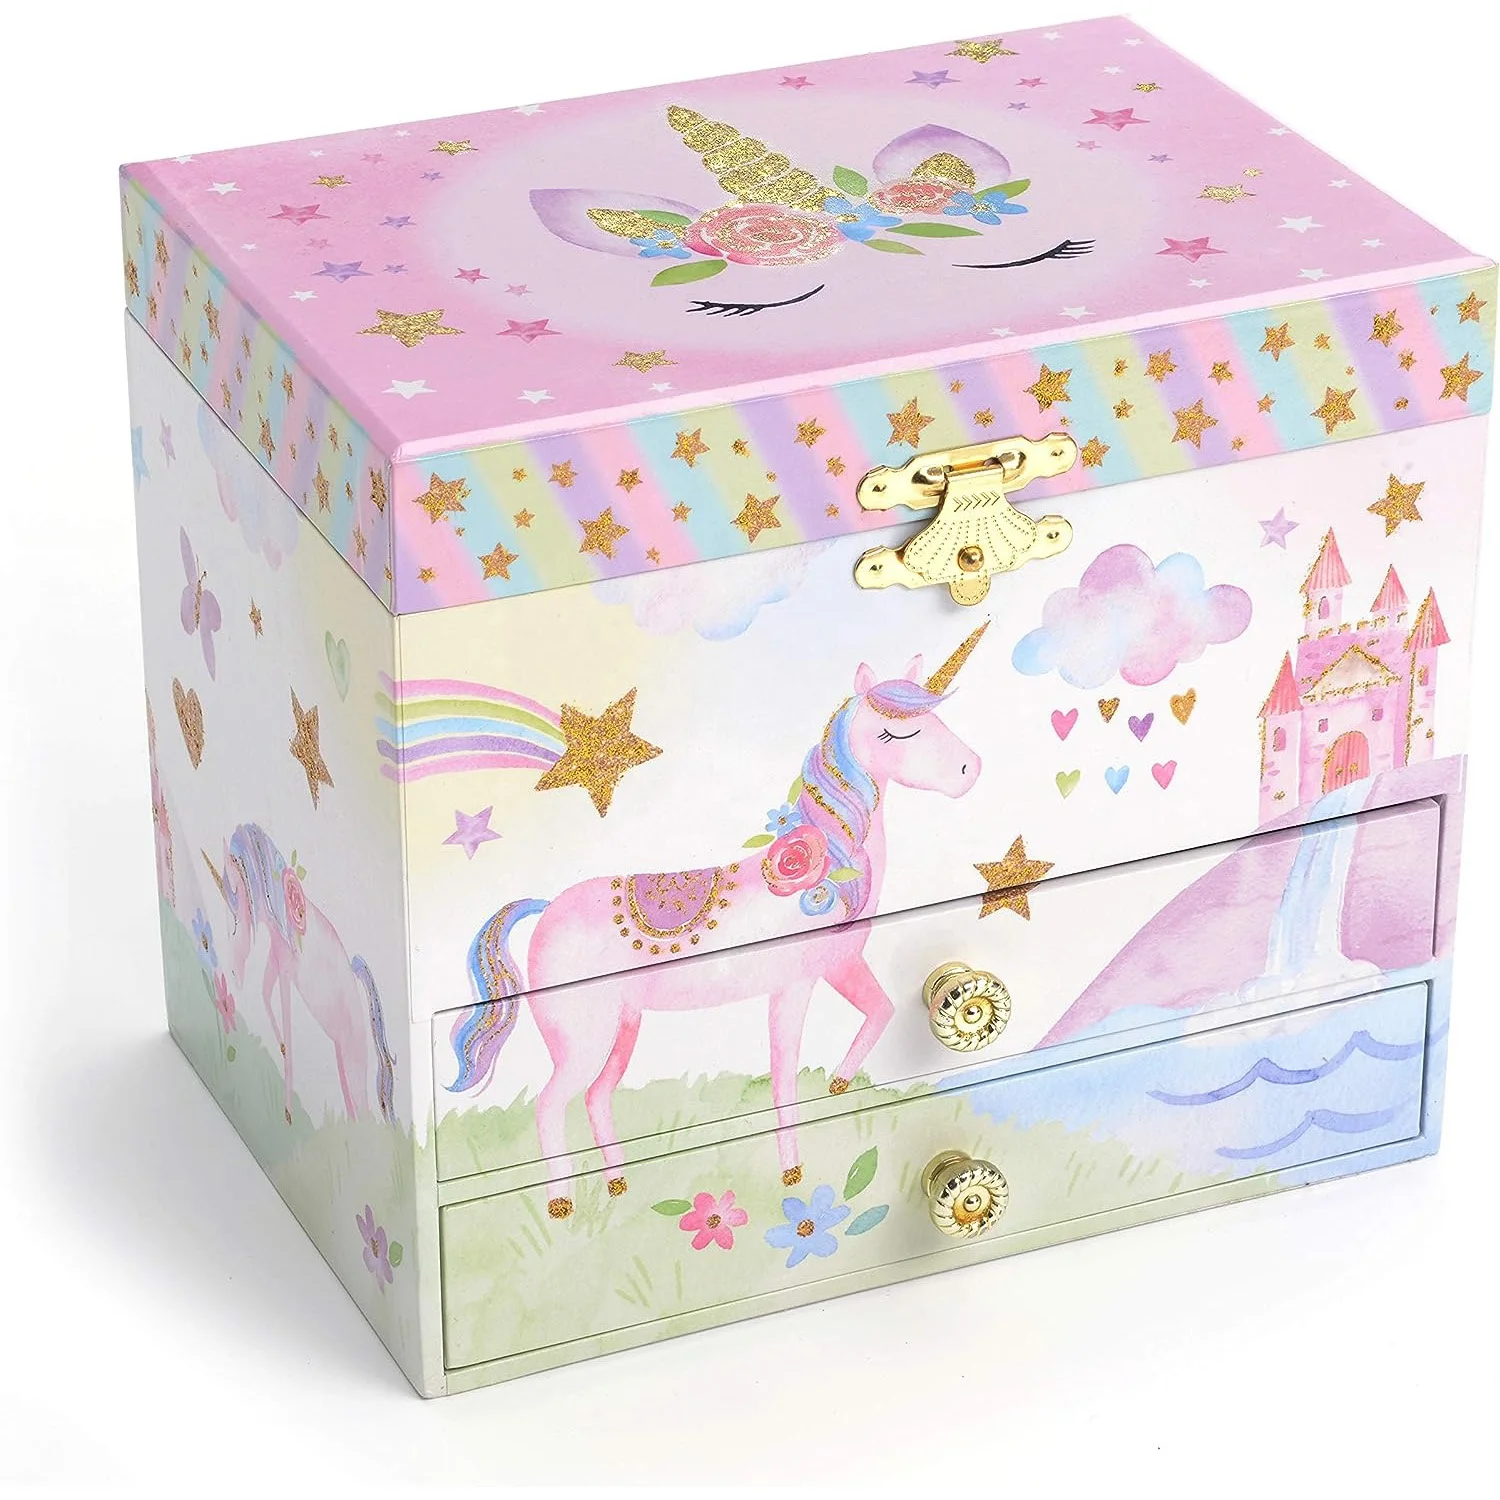 Ever Bright High Quality Promotional Gift Unicorn Little Queen Dancing Ballerina Wooden Jewelry Music Box With 2 Drawers